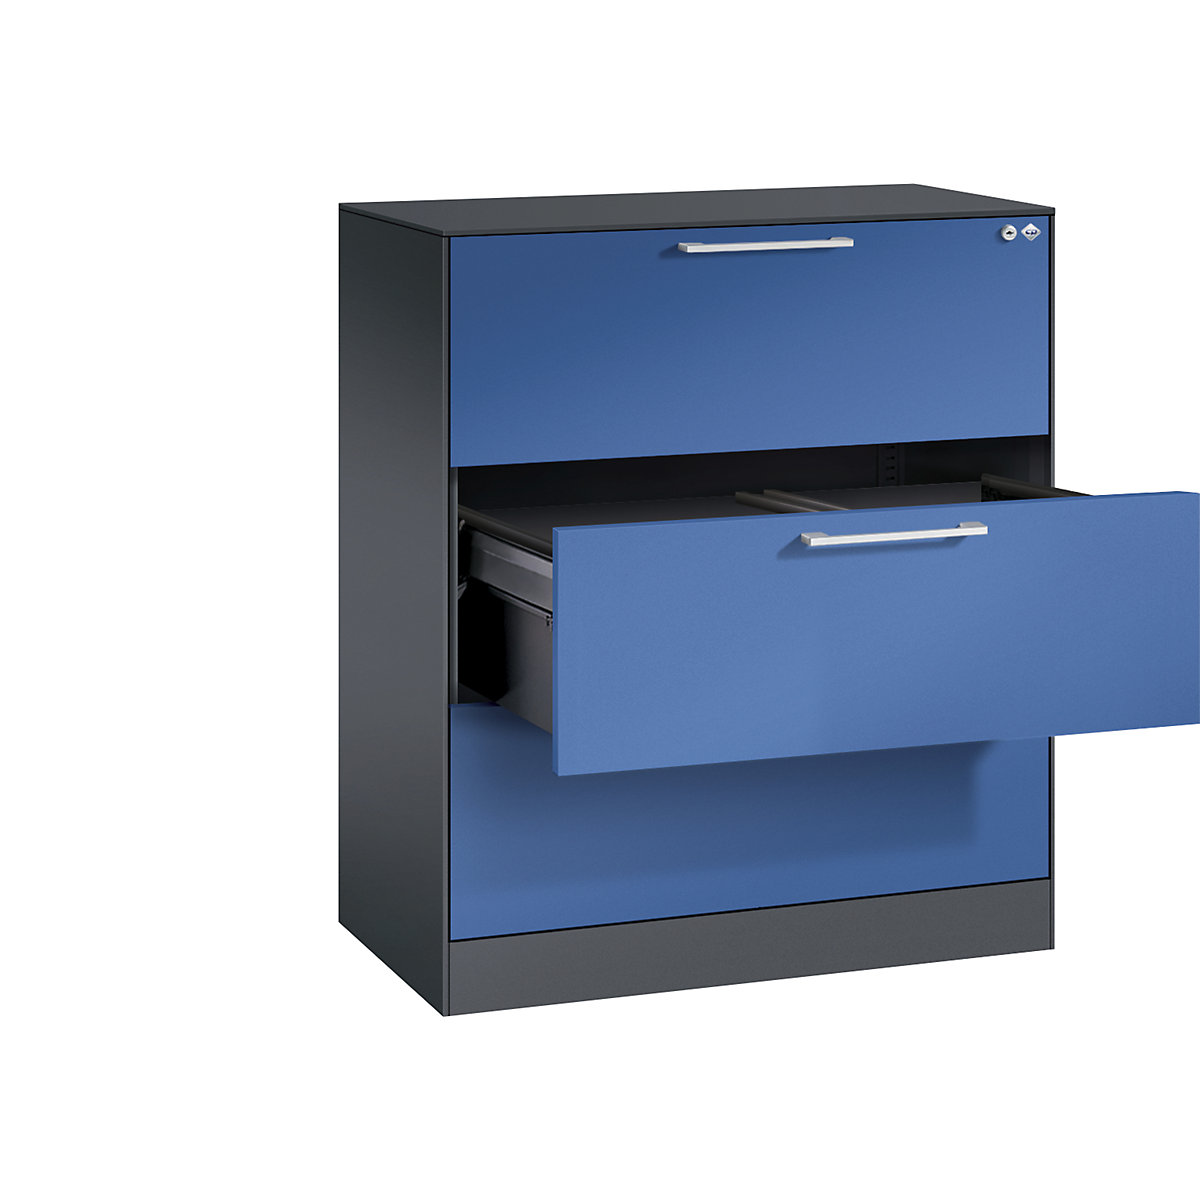 ASISTO suspension filing cabinet – C+P, width 800 mm, with 3 drawers, black grey/gentian blue-15